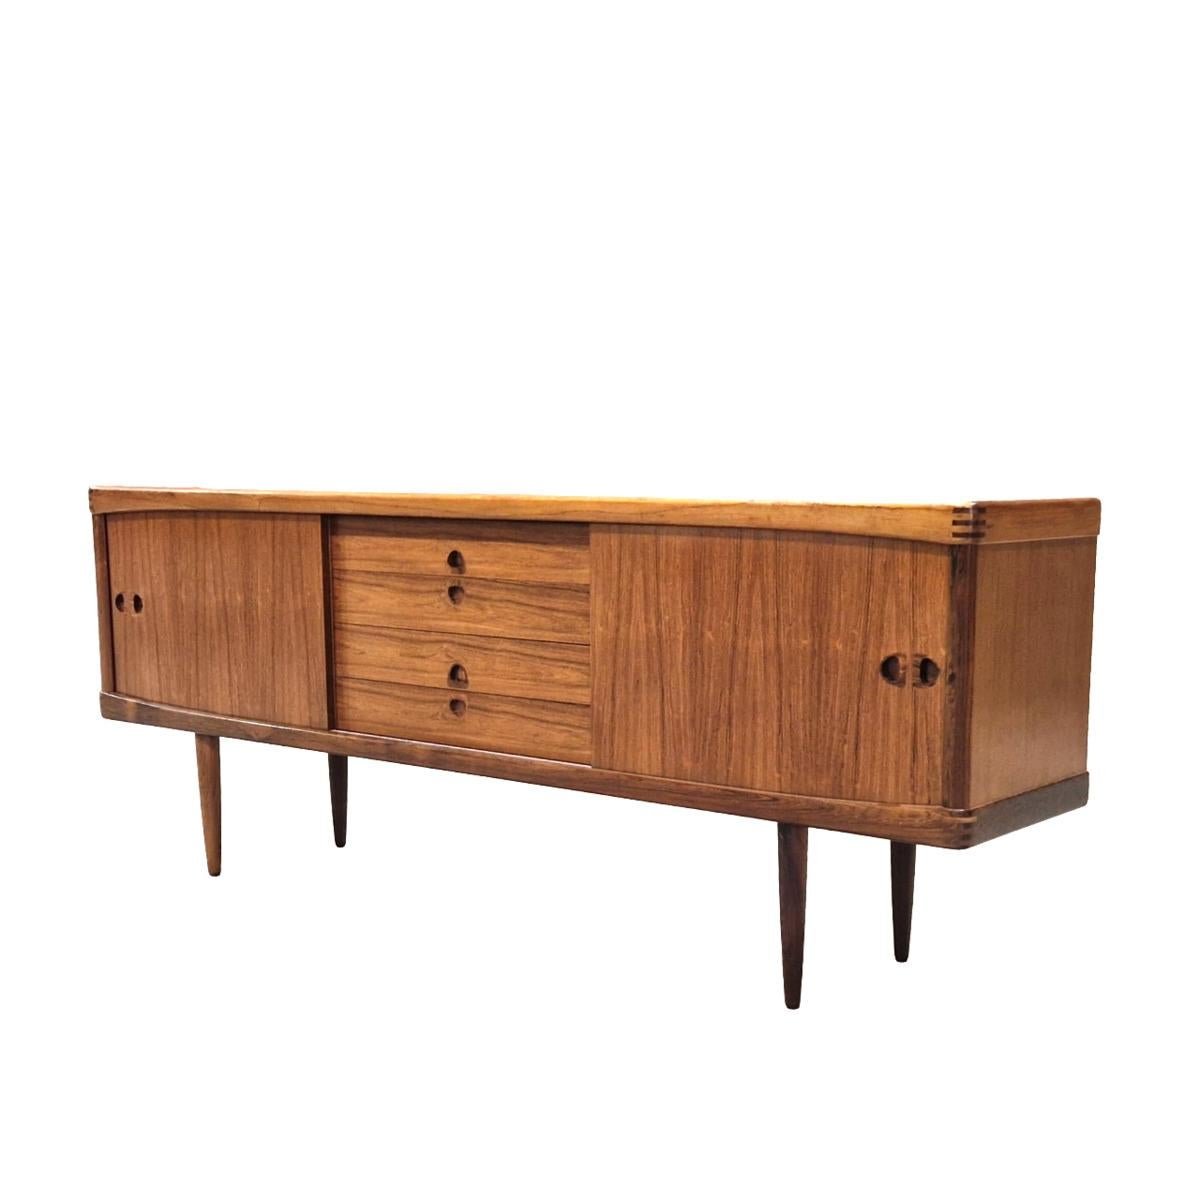 This high quality sideboard is perfect down to the smallest detail. The back of this sideboard, also in beautifully veined wood, allows it to be used as a middle piece of furniture or as a living room divider.